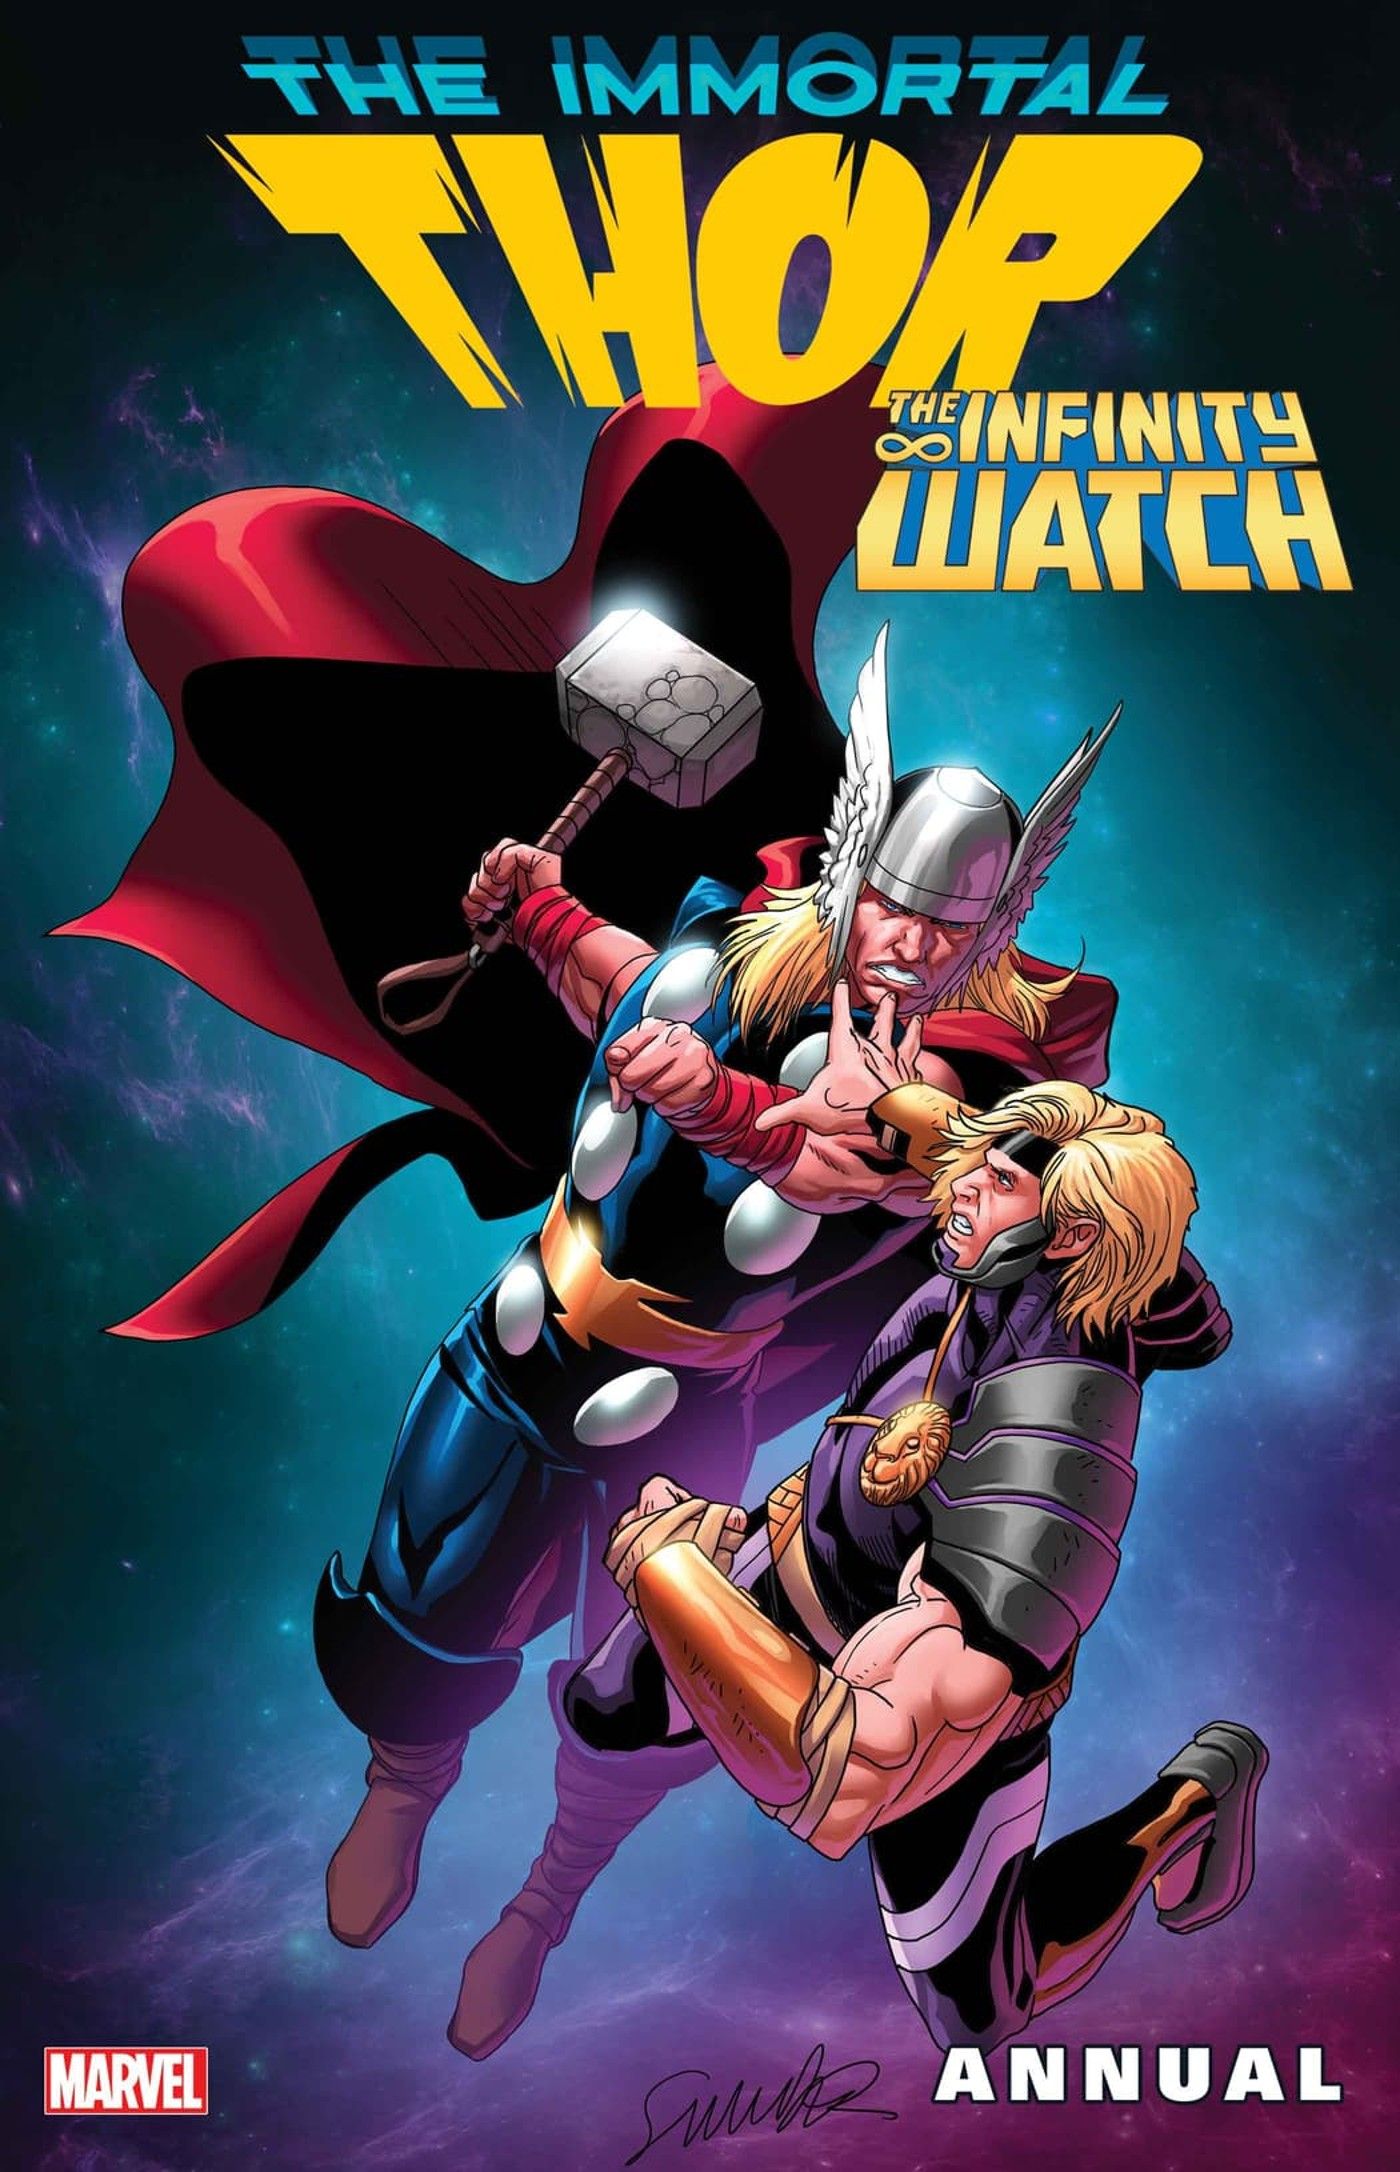 the immortal thor annual cover - thor battles the prince of power in space